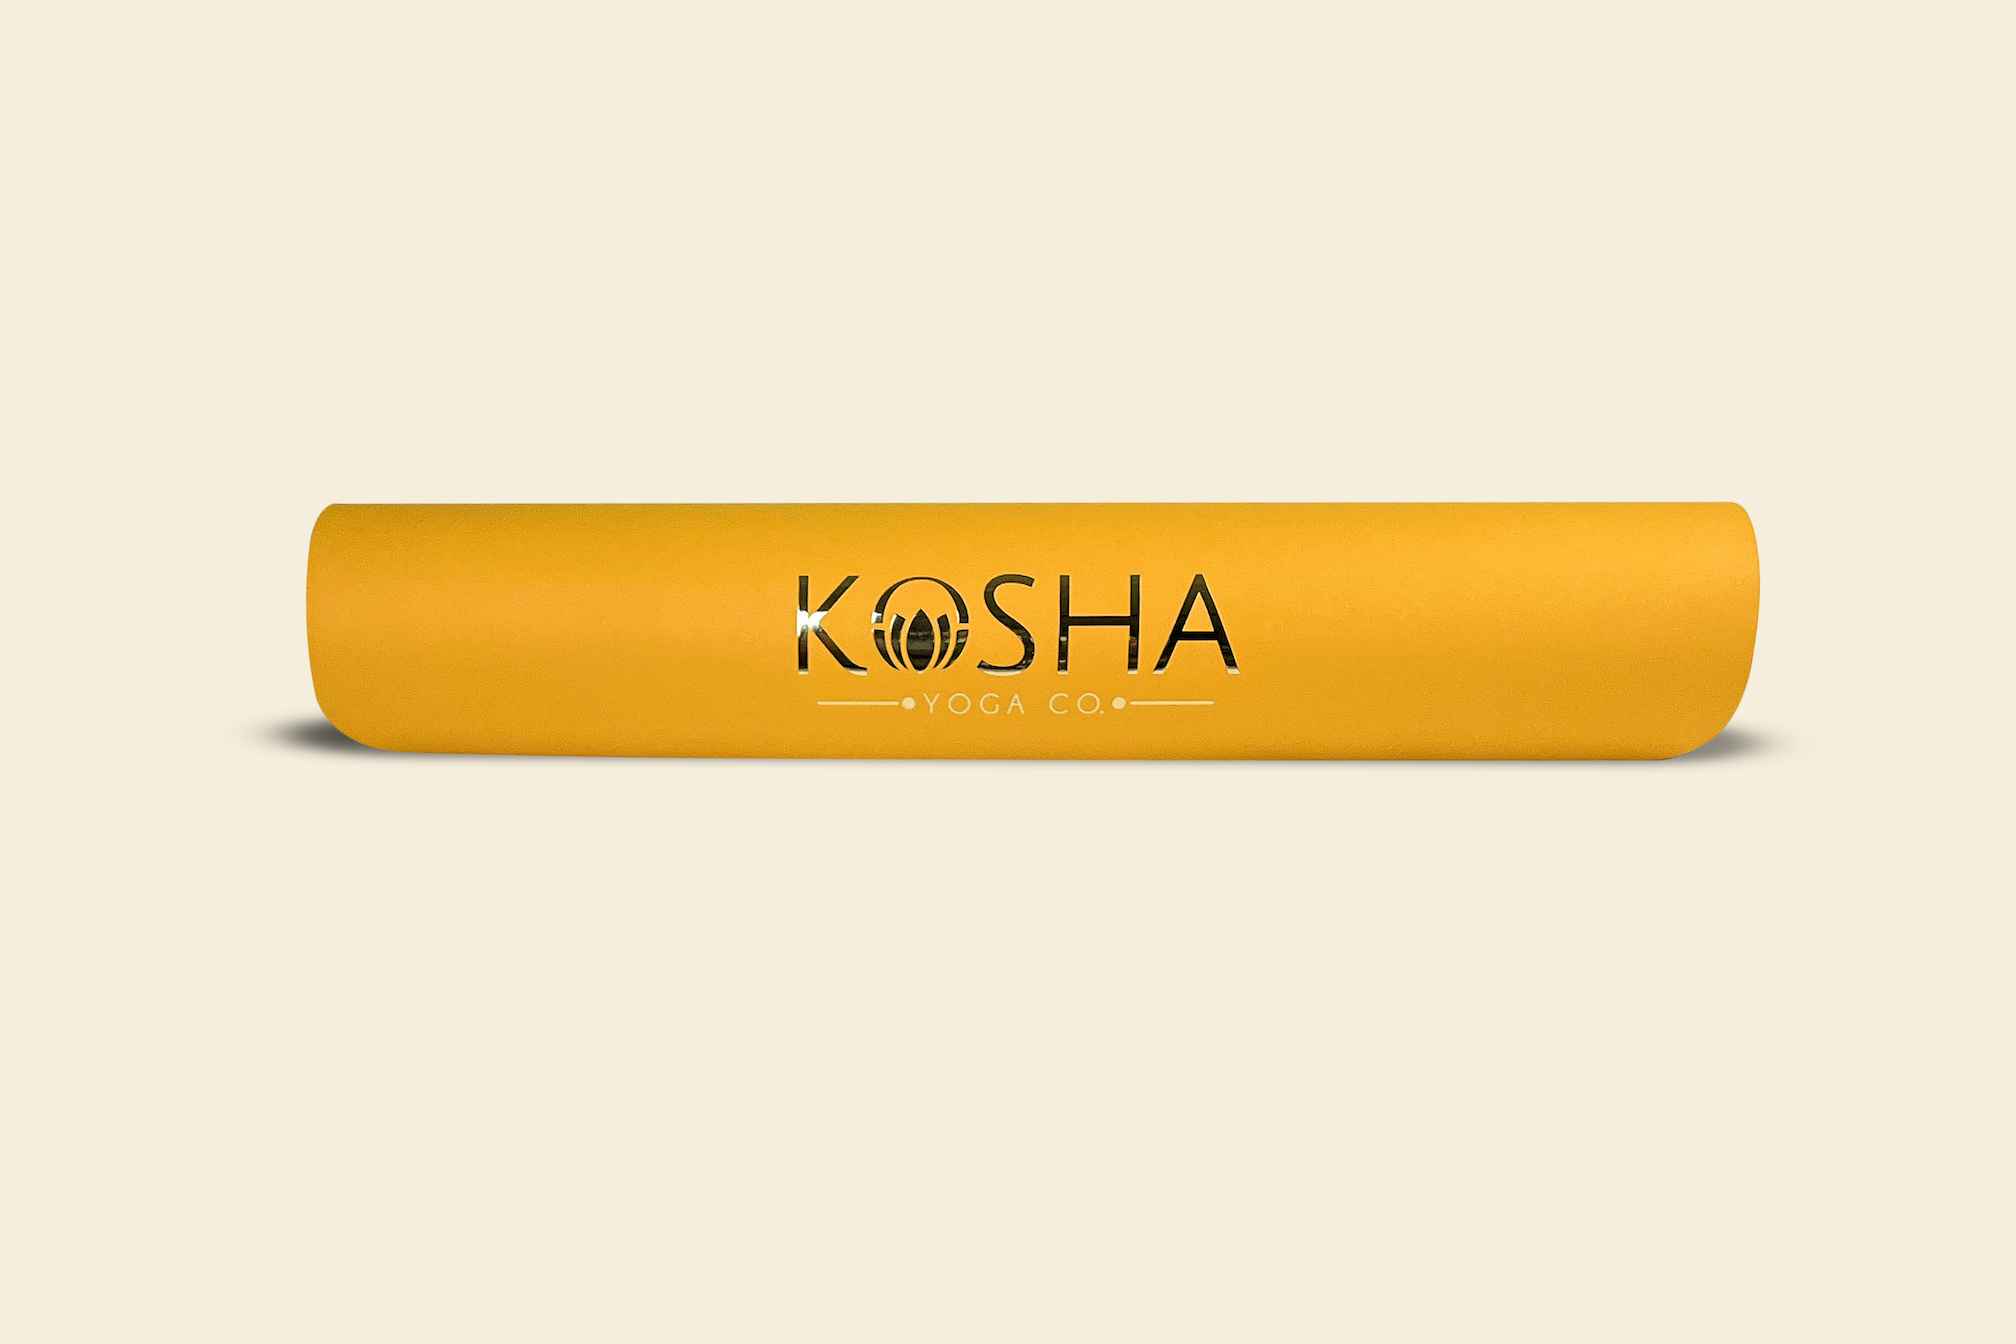 Sweat Absorbent Non Slip Rubber Yoga Mat With Alignment Lines In Orange Yellow Colour By Kosha Yoga Co